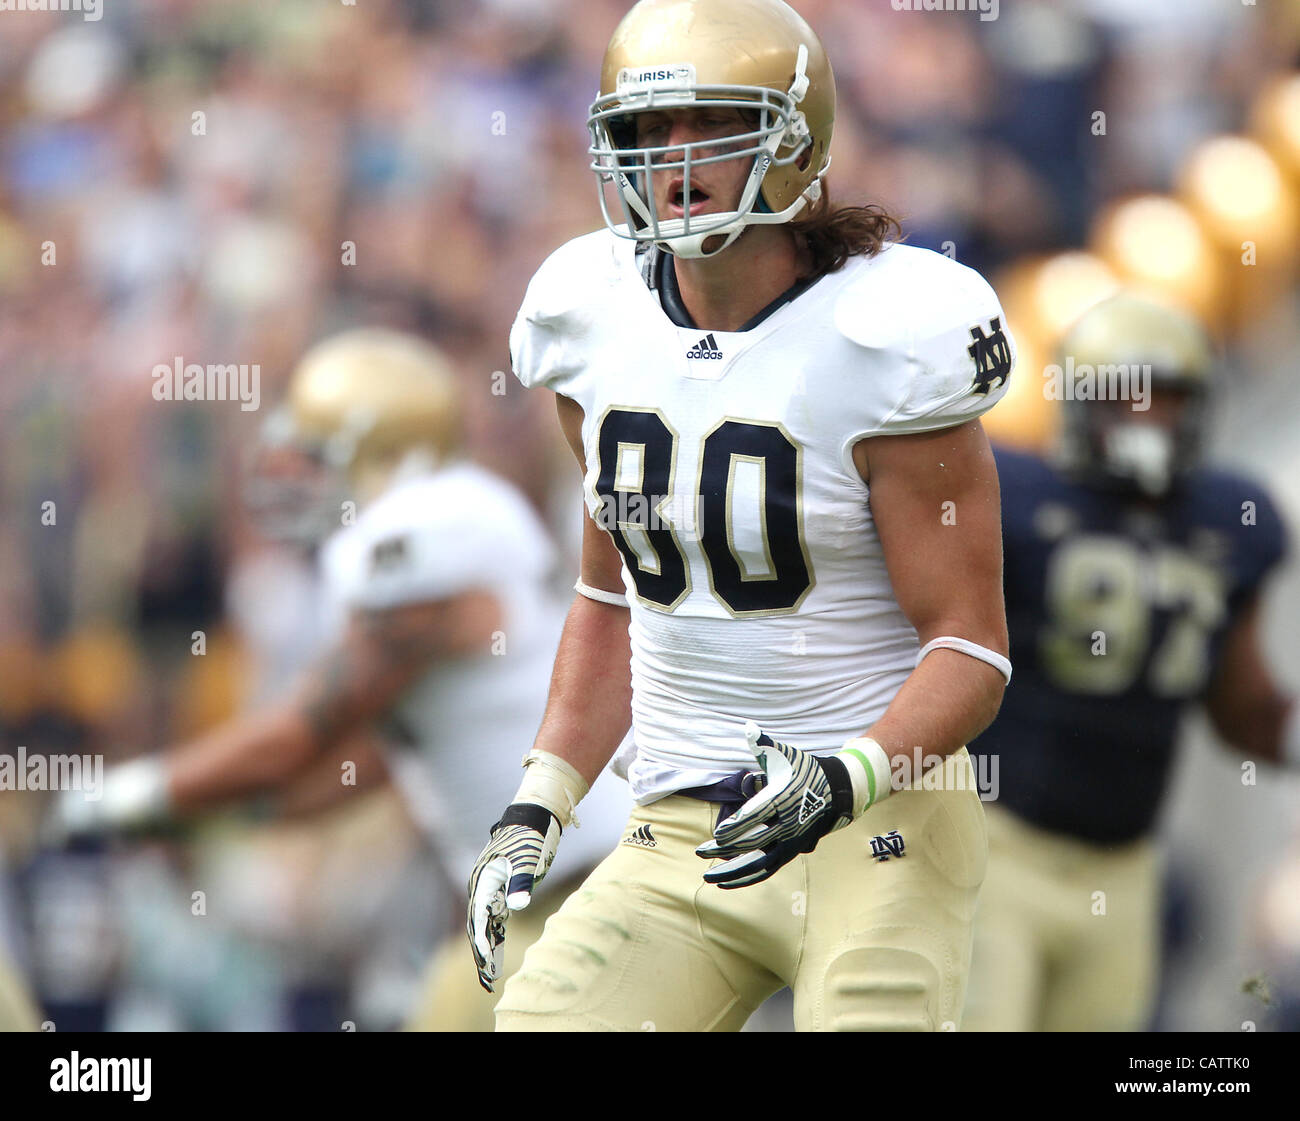 Sept. 24, 2011 - Pittsburgh, Pennsylvania, USA - Notre Dame Fighting Irish tight end Tyler Eifert (80). The Notre Dame Fighting Irish were able to hold onto a slight lead to beat the University of Pittsburgh Panthers in Hienz Field.  Photo By Aaron Suozzi (Credit Image: © Aaron Souzzi/ZUMAPRESS.com) Stock Photo